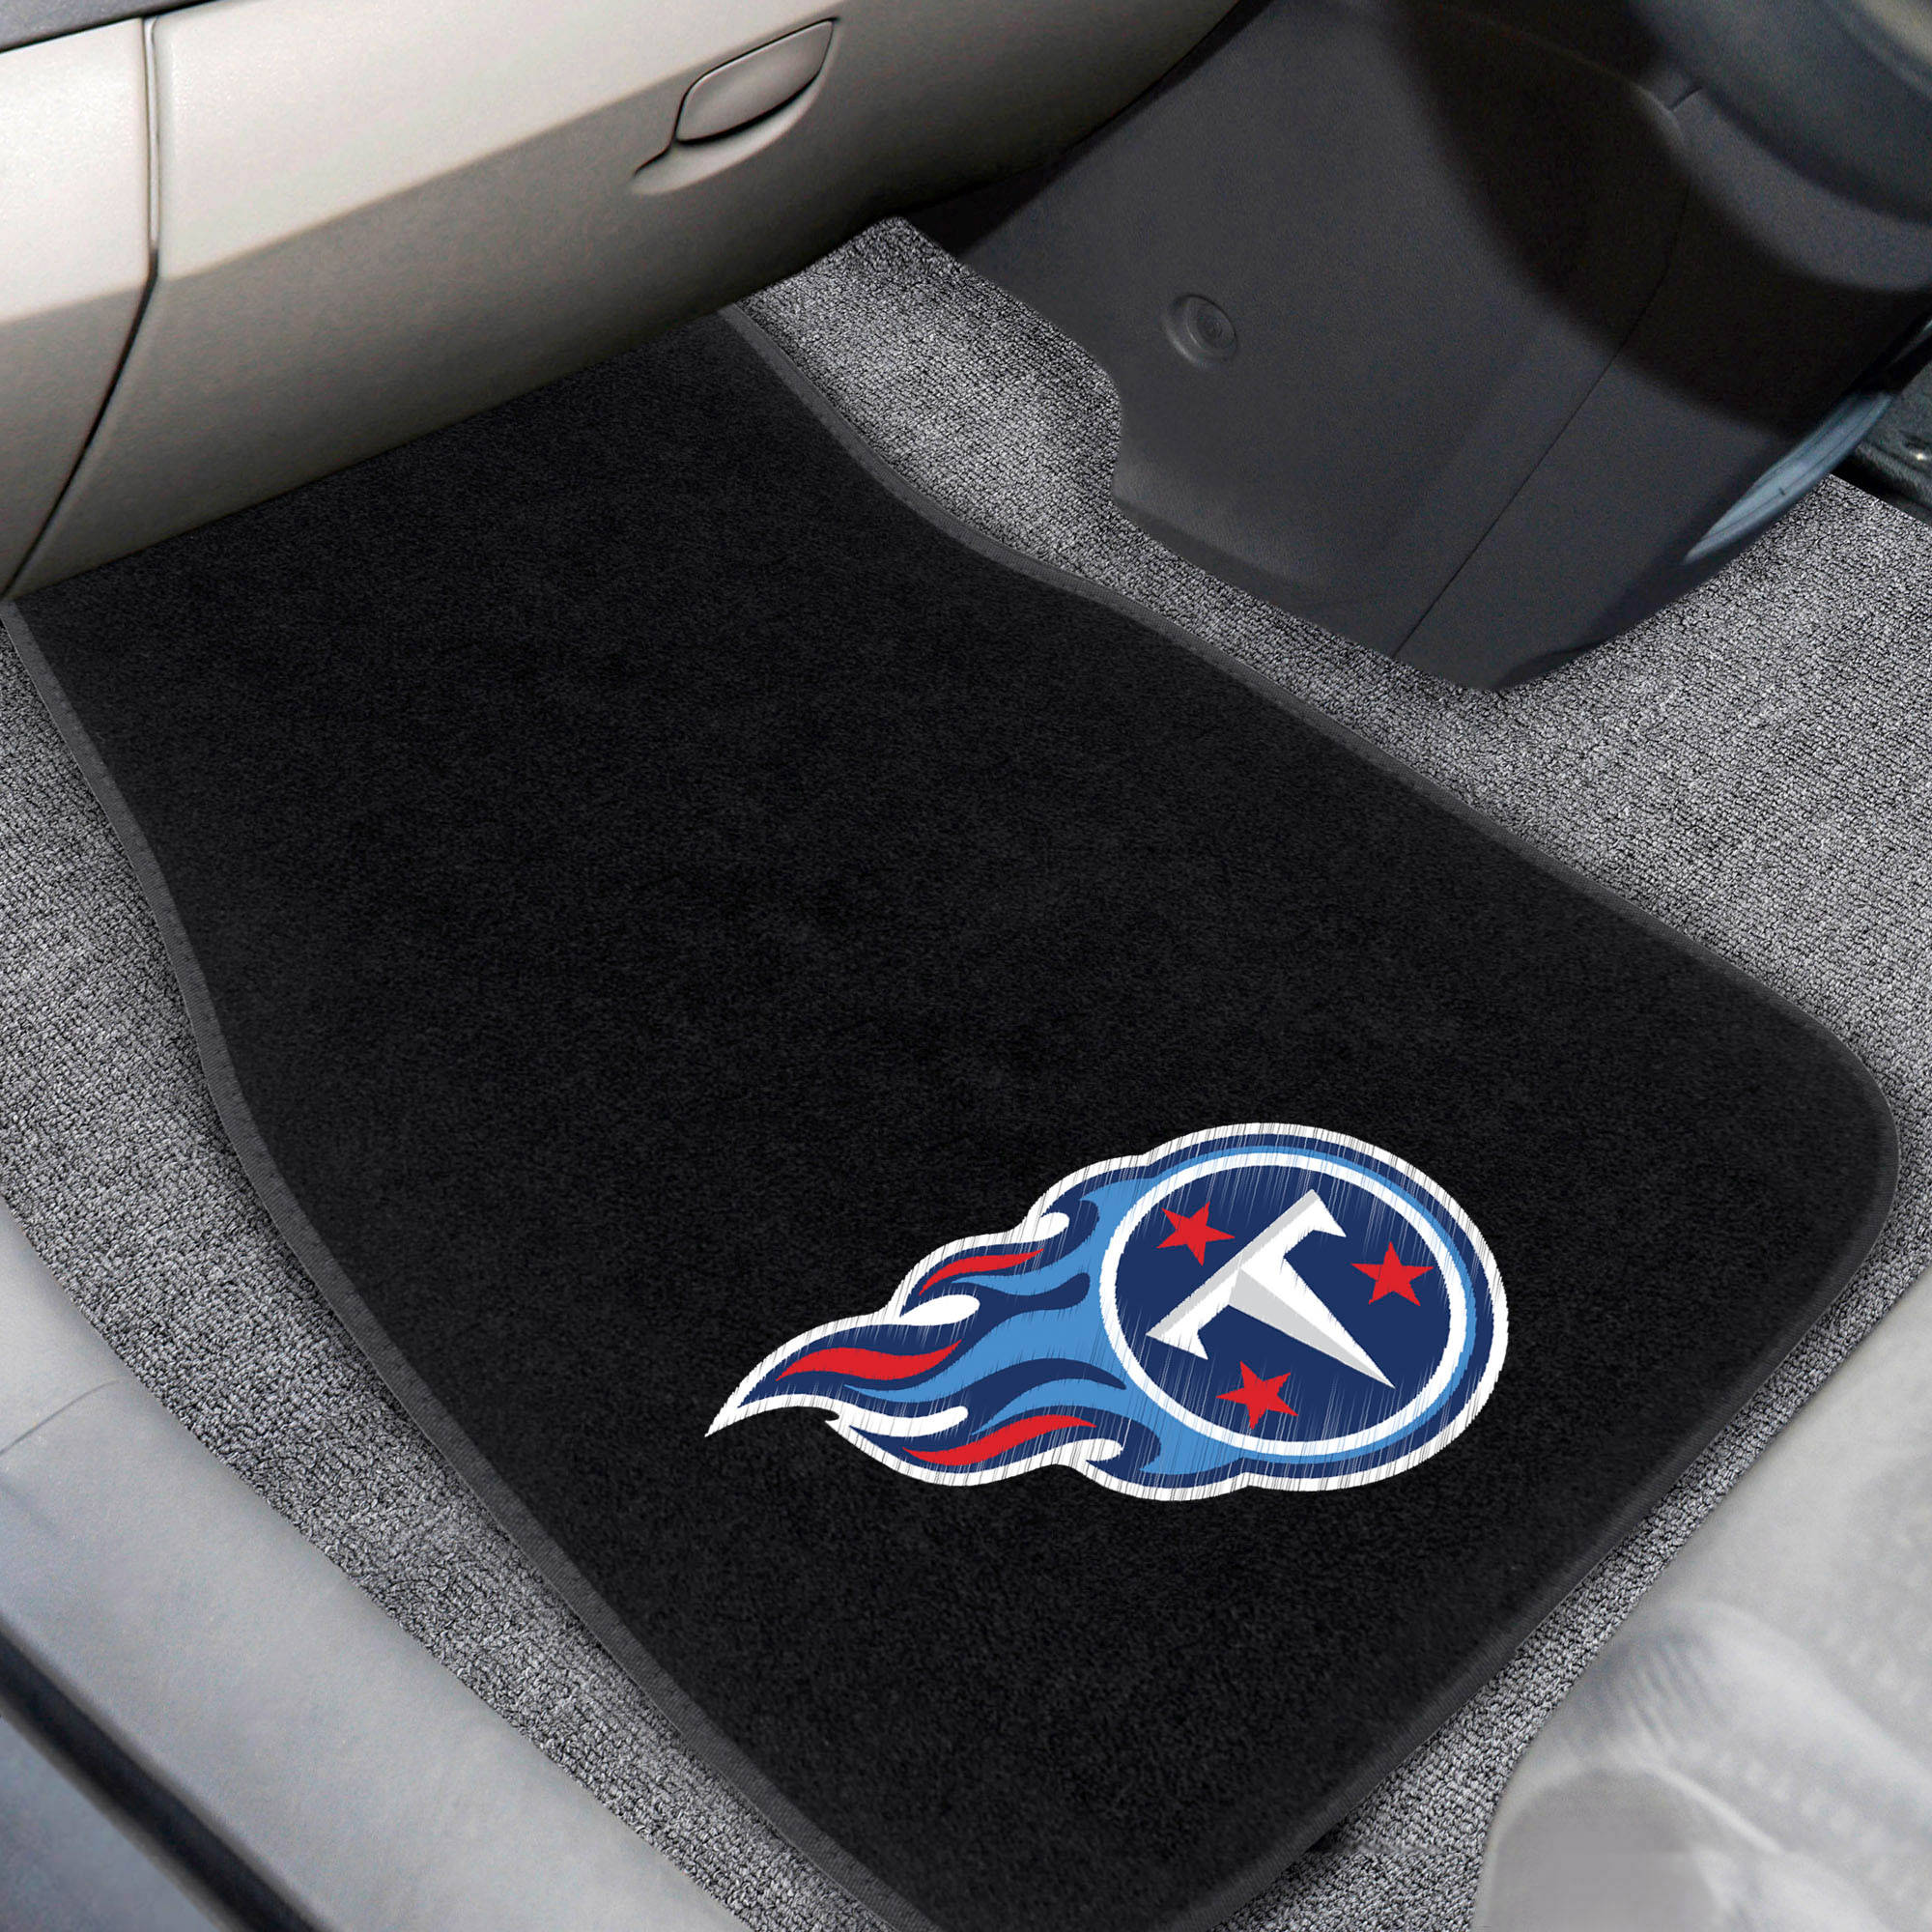 Fan Mats NFL Football Embroidered Car Mat - Set of 2 - image 2 of 4